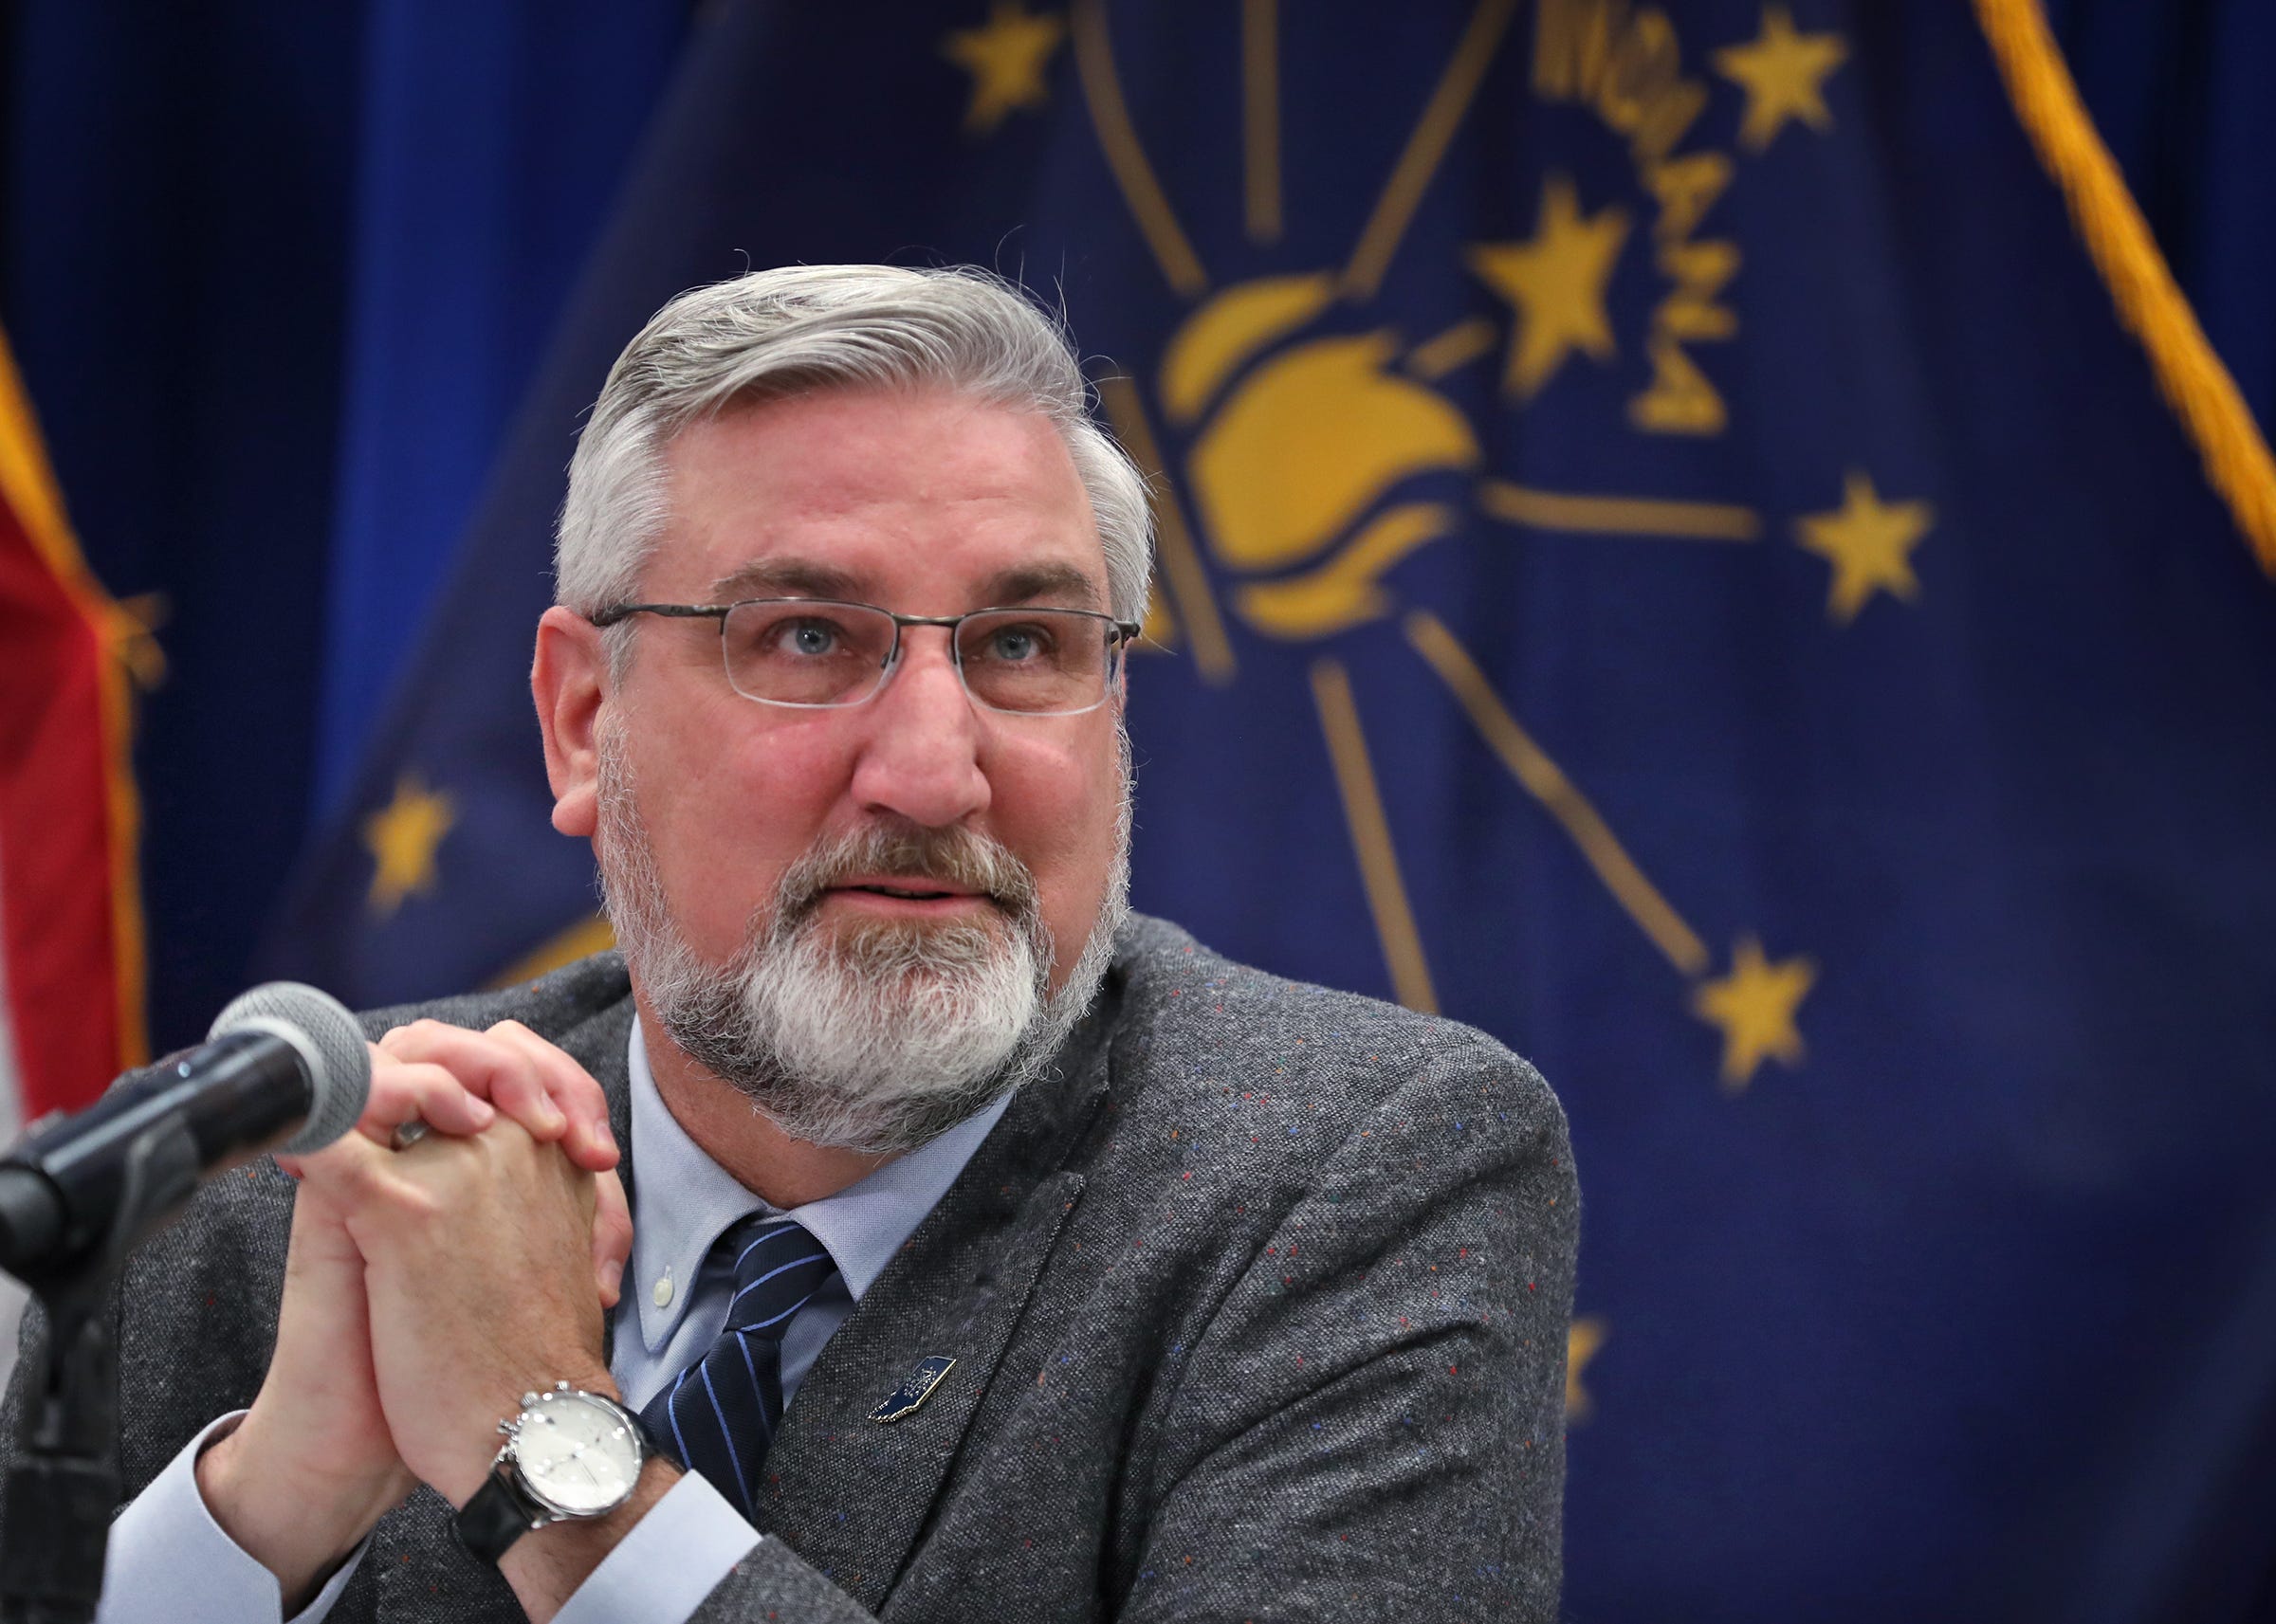 Gov. Eric Holcomb appoints members to the Alcohol & Tobacco Commission, which is responsible for regulating bars and clubs across Indiana that sell alcohol. He declined an interview request from IndyStar.